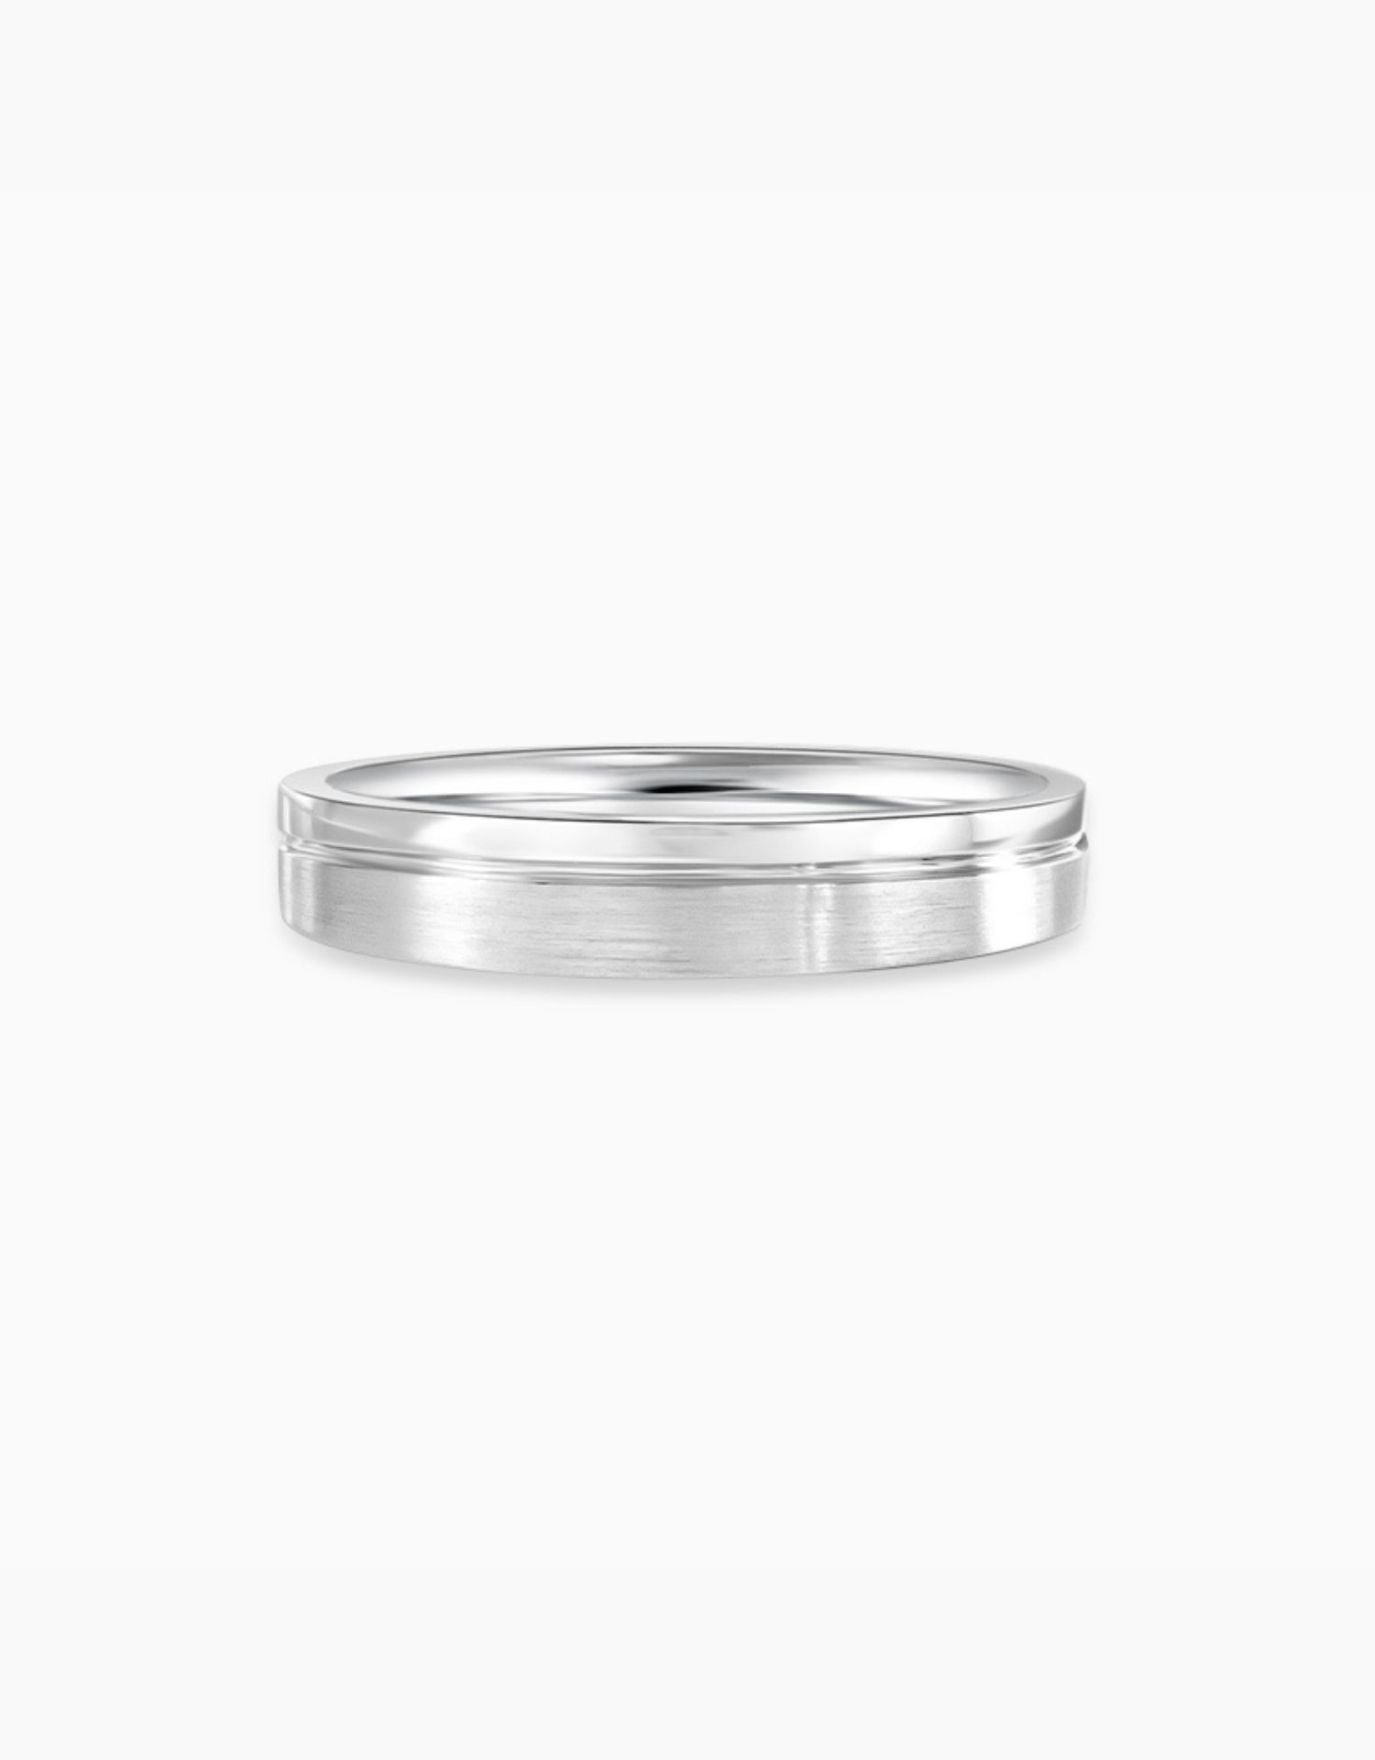 LVC Purete Polished Two Tone Wedding Band in Platinum